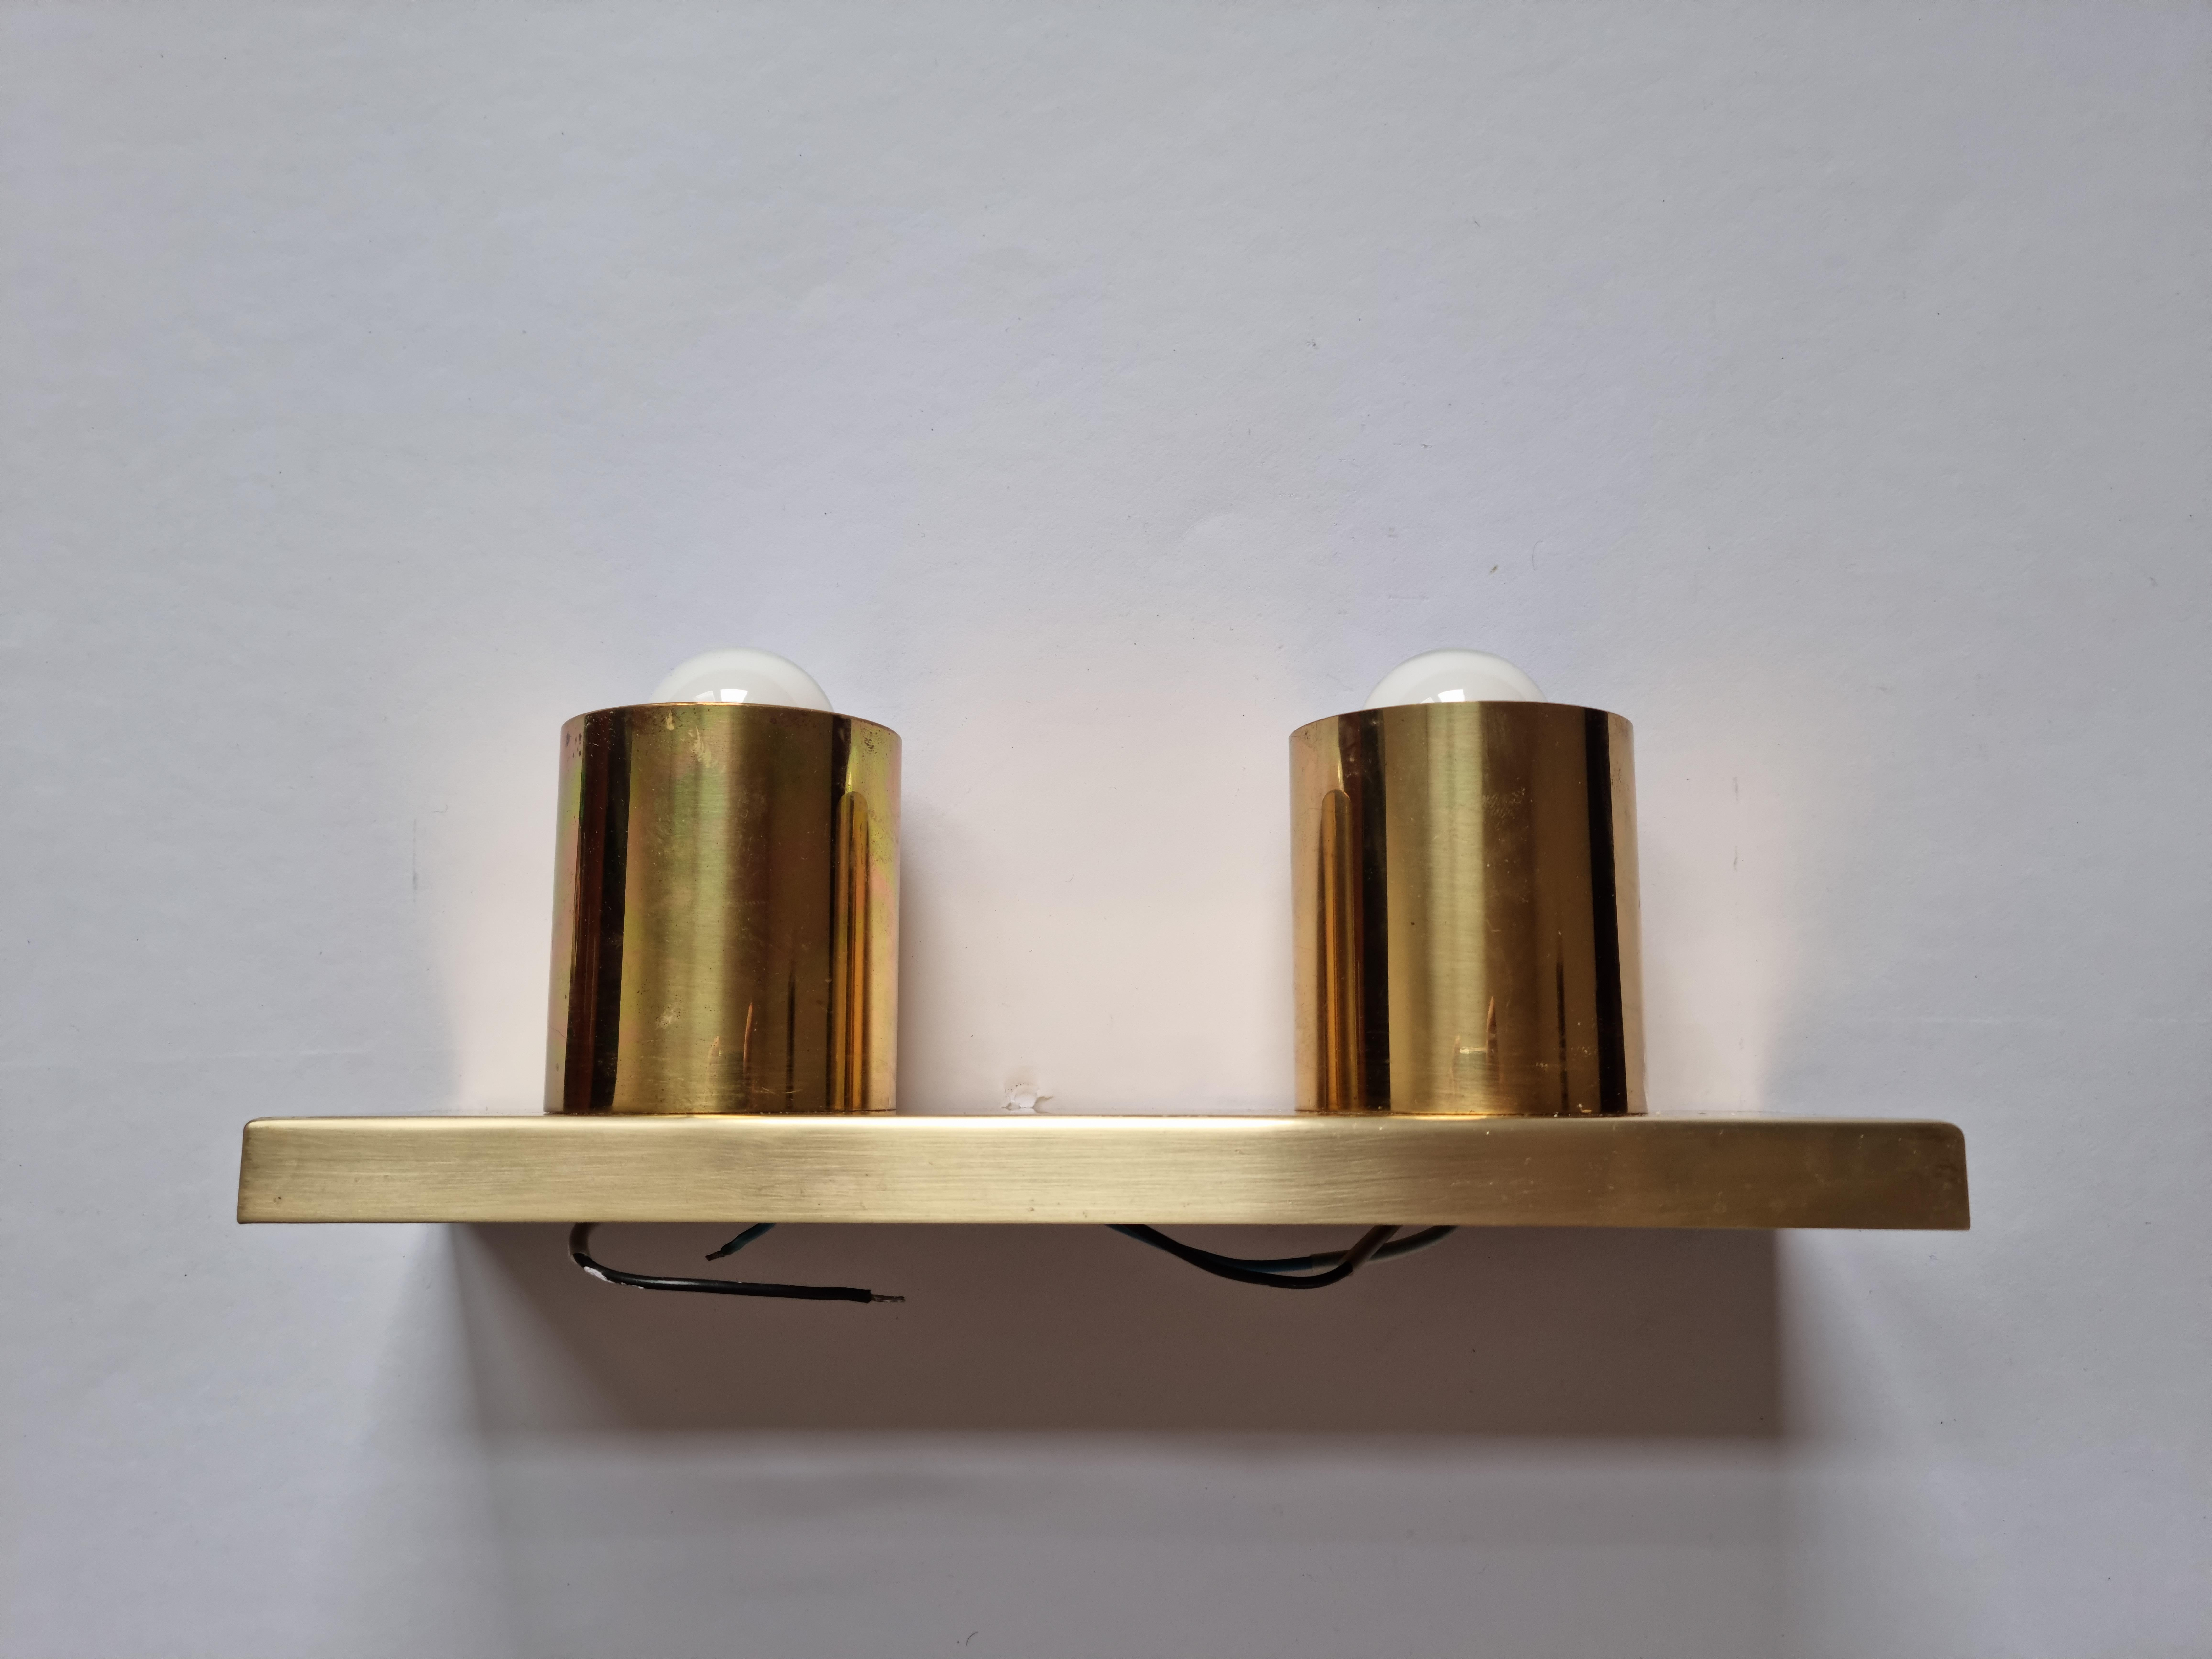 Midcentury Rare Wall Lamp Beisl Leuchte, Germany, 1960s For Sale 5